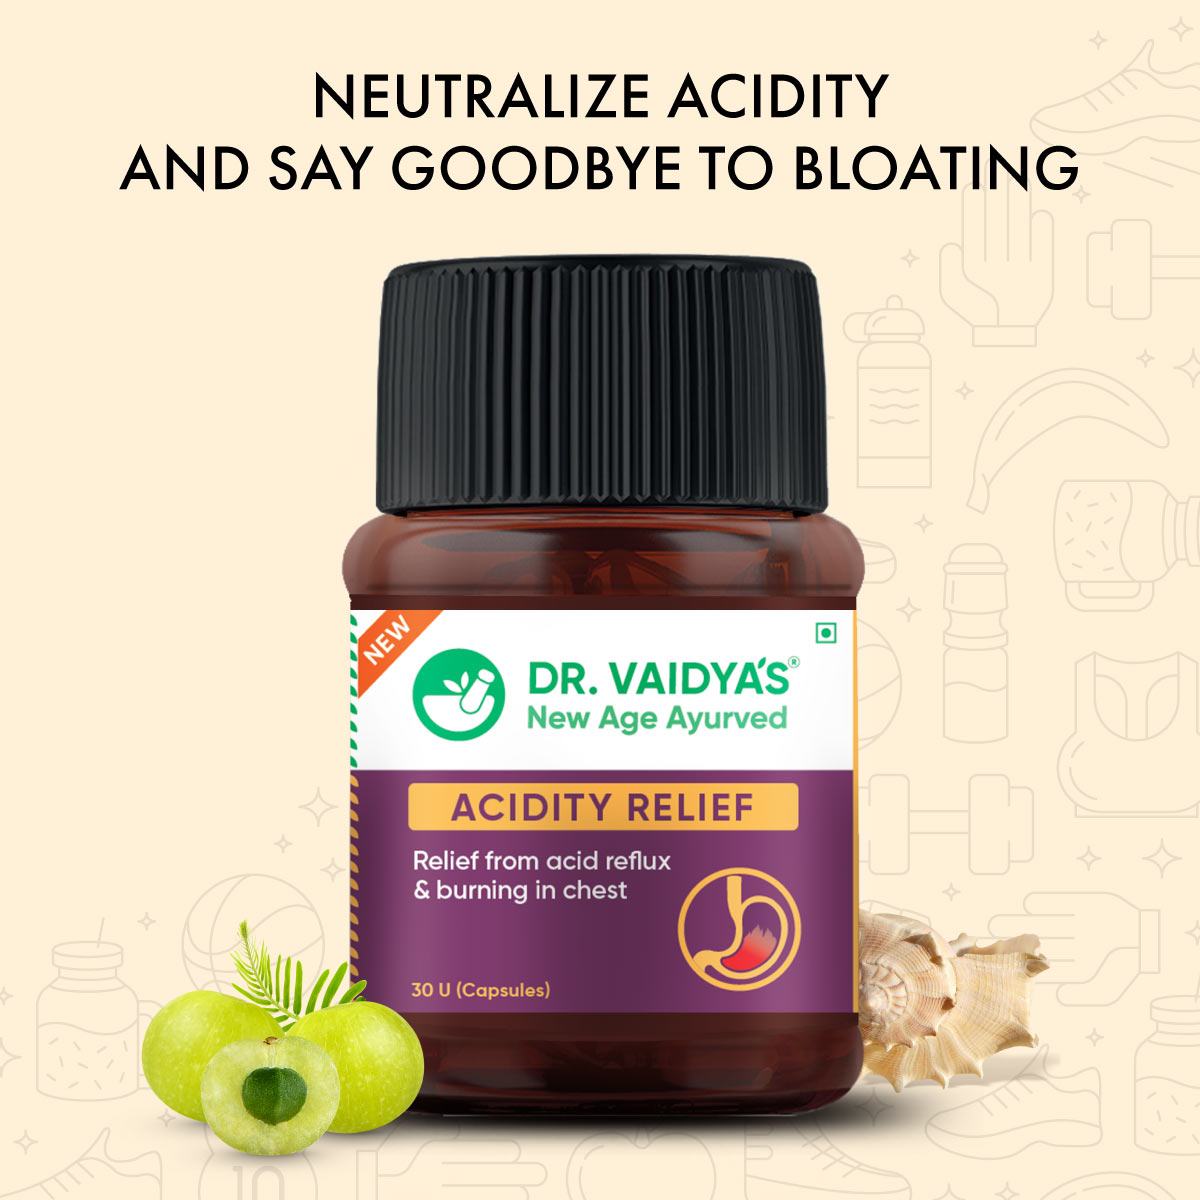 Dr. Vaidya's AcidityRelief Gut Care: For Fast & Long-Lasting Relief From Acidity